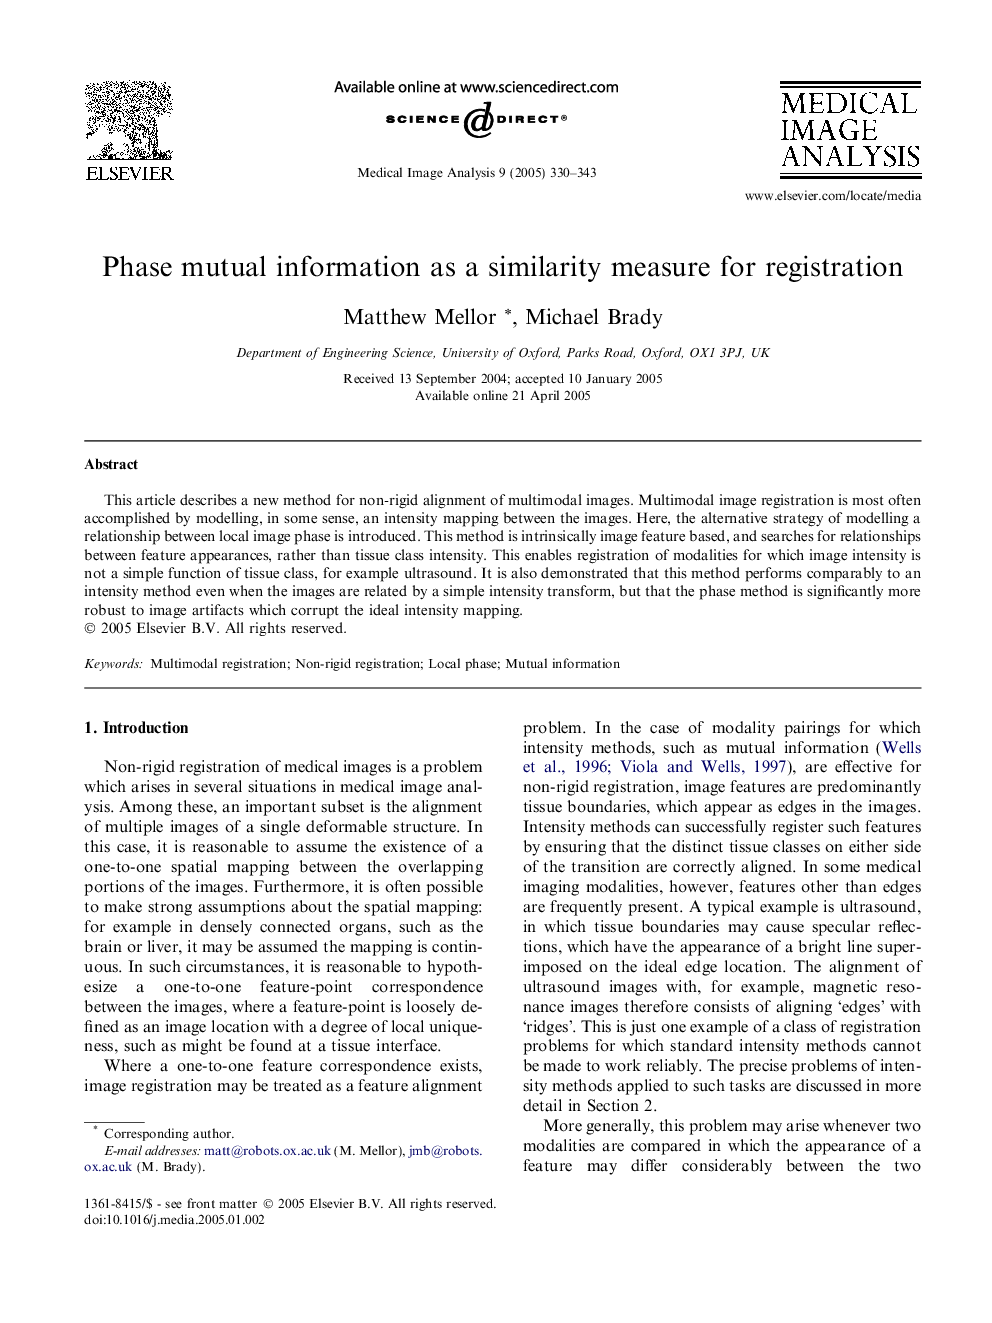 Phase mutual information as a similarity measure for registration